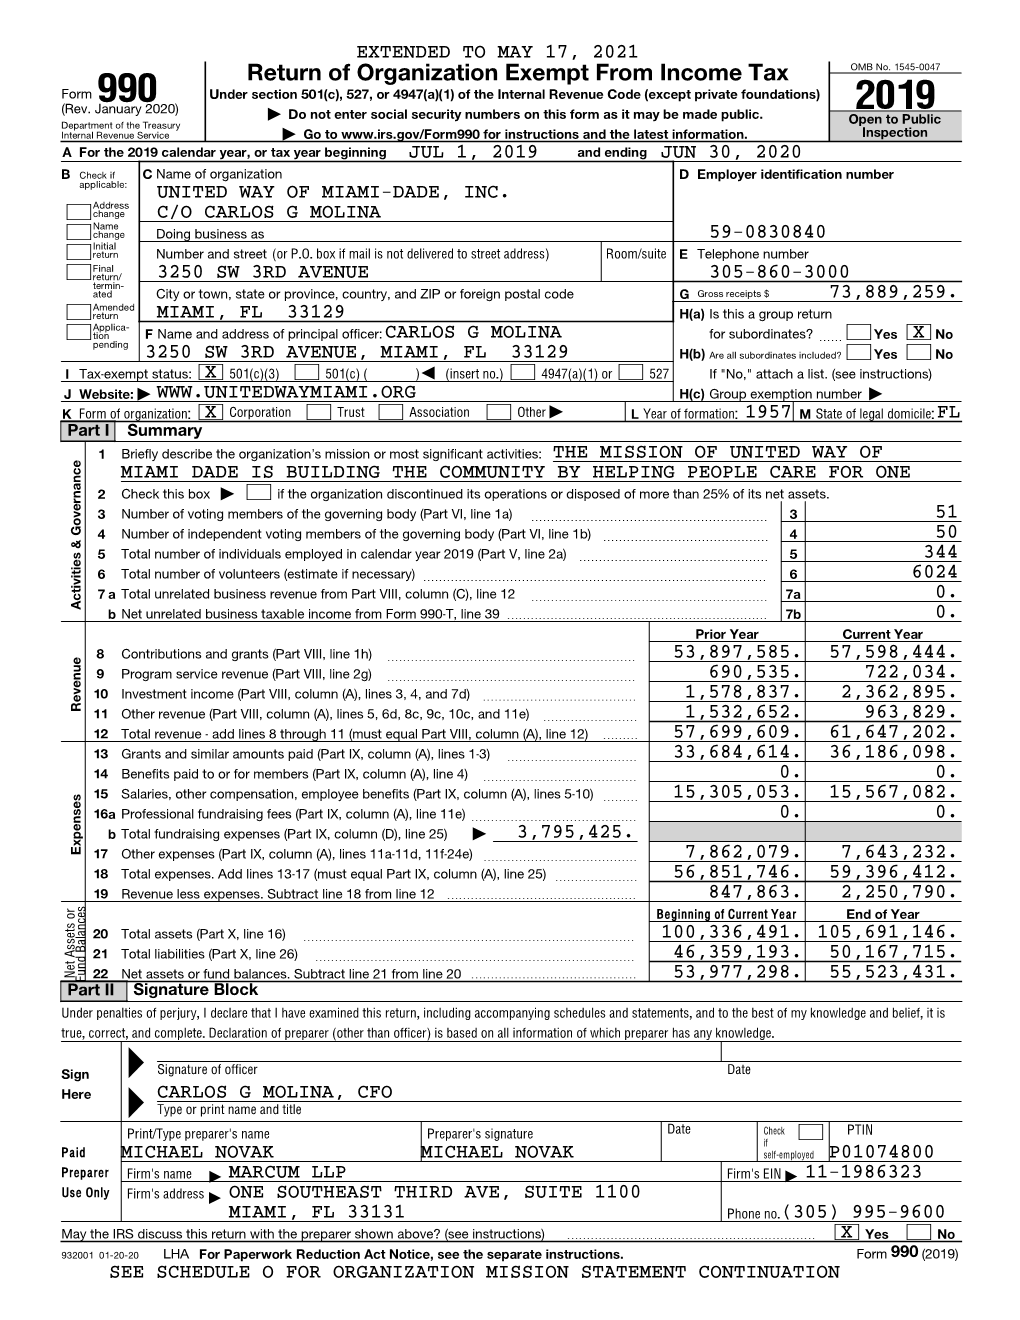 990 Tax Return for 2019-2020 Fiscal Year